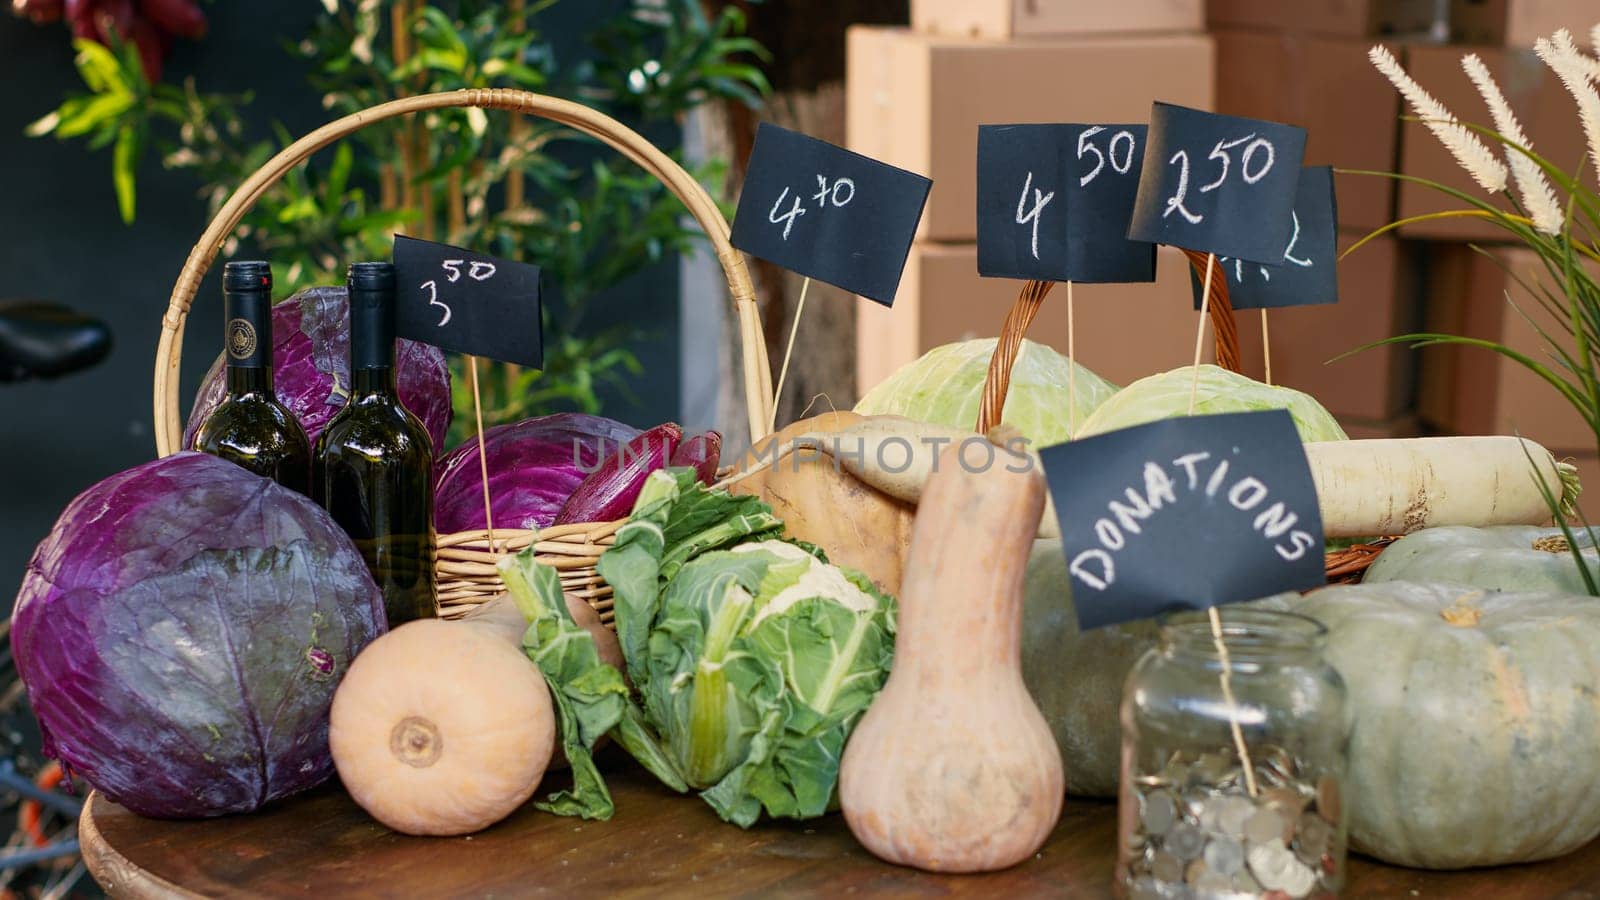 Variety of fresh locally grown lettuce and cabbage next to donations jar, colorful ripe natural products on farmers market stand. Organic produce on counter and table with coins. Close up.